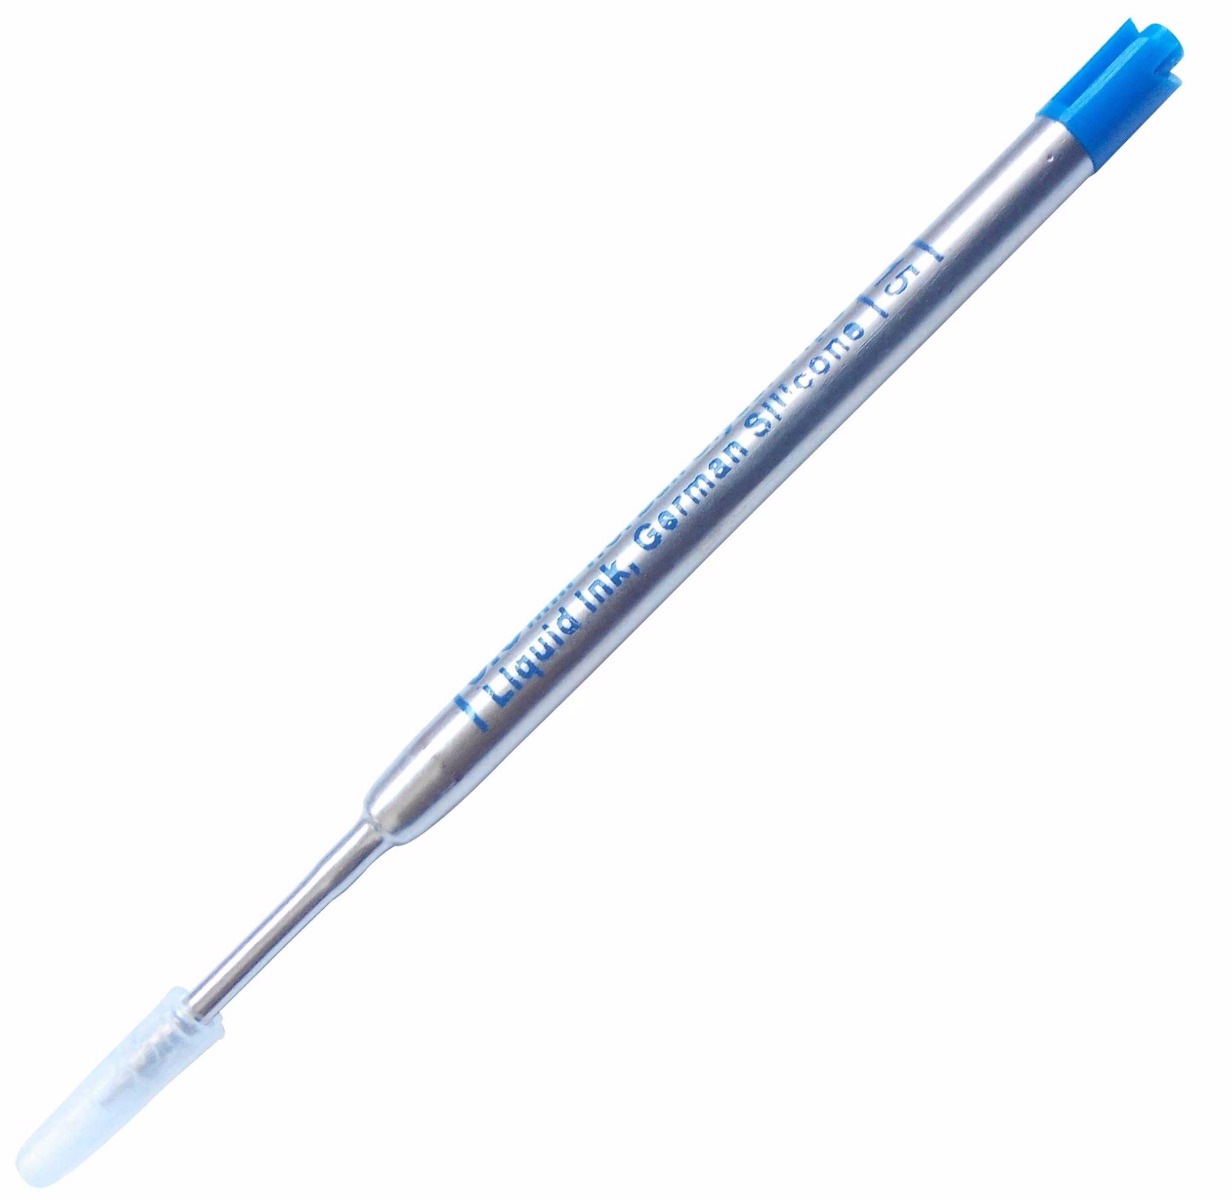 ATALY 15 METAL BODY JOTTER REFILL BLUE COLOR INK MODEL: 11129